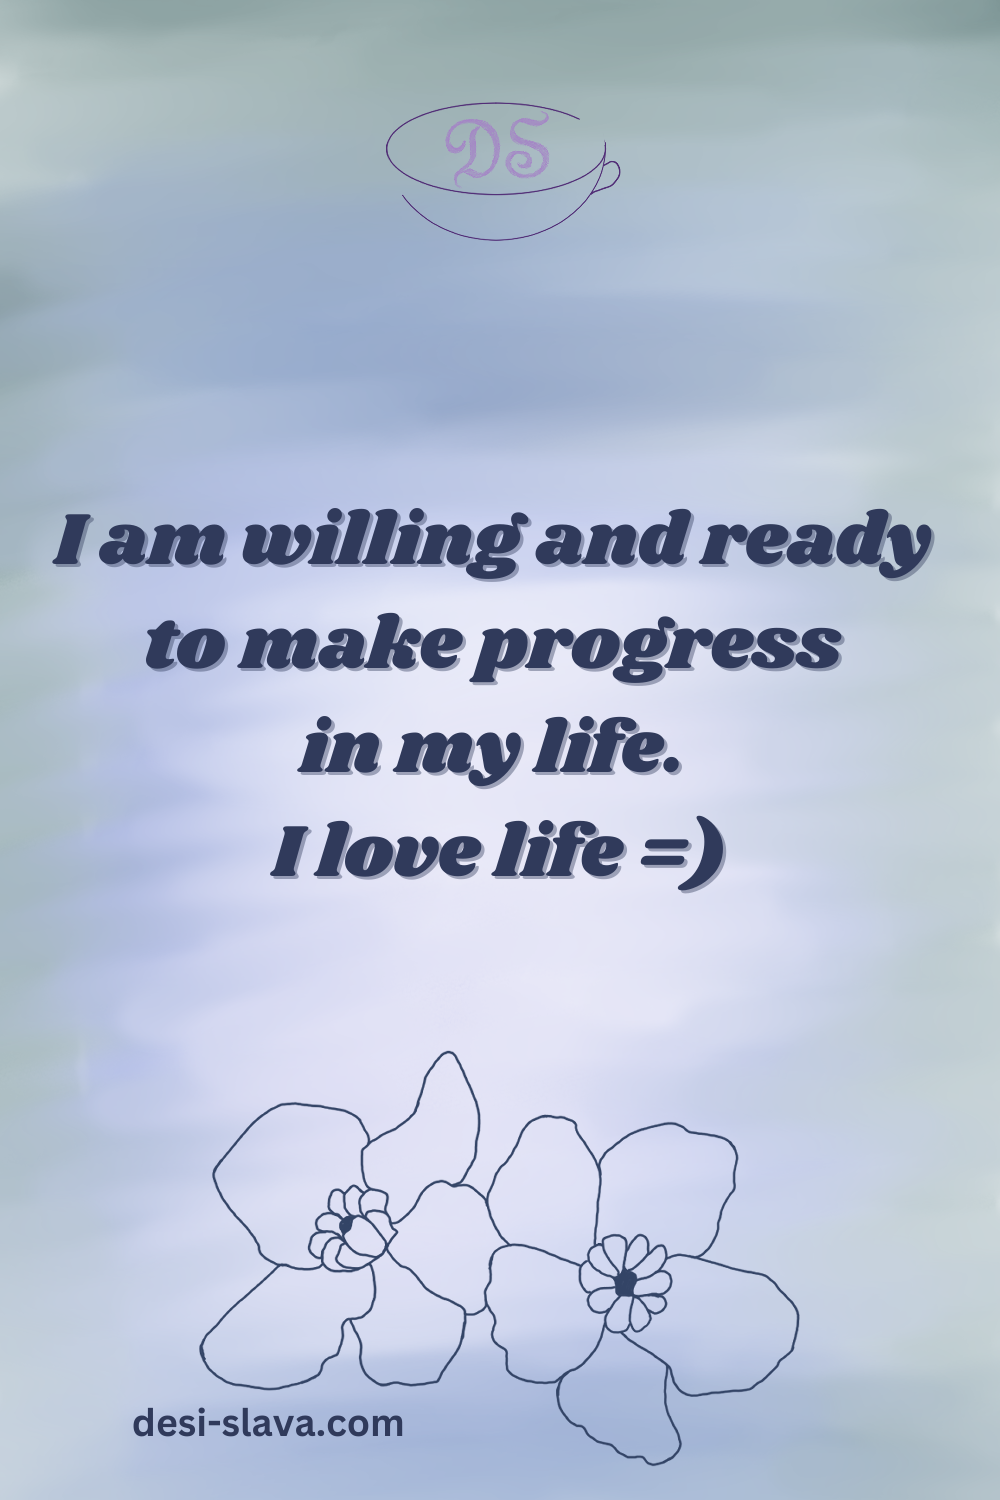 Making Successful Progress in Your Life